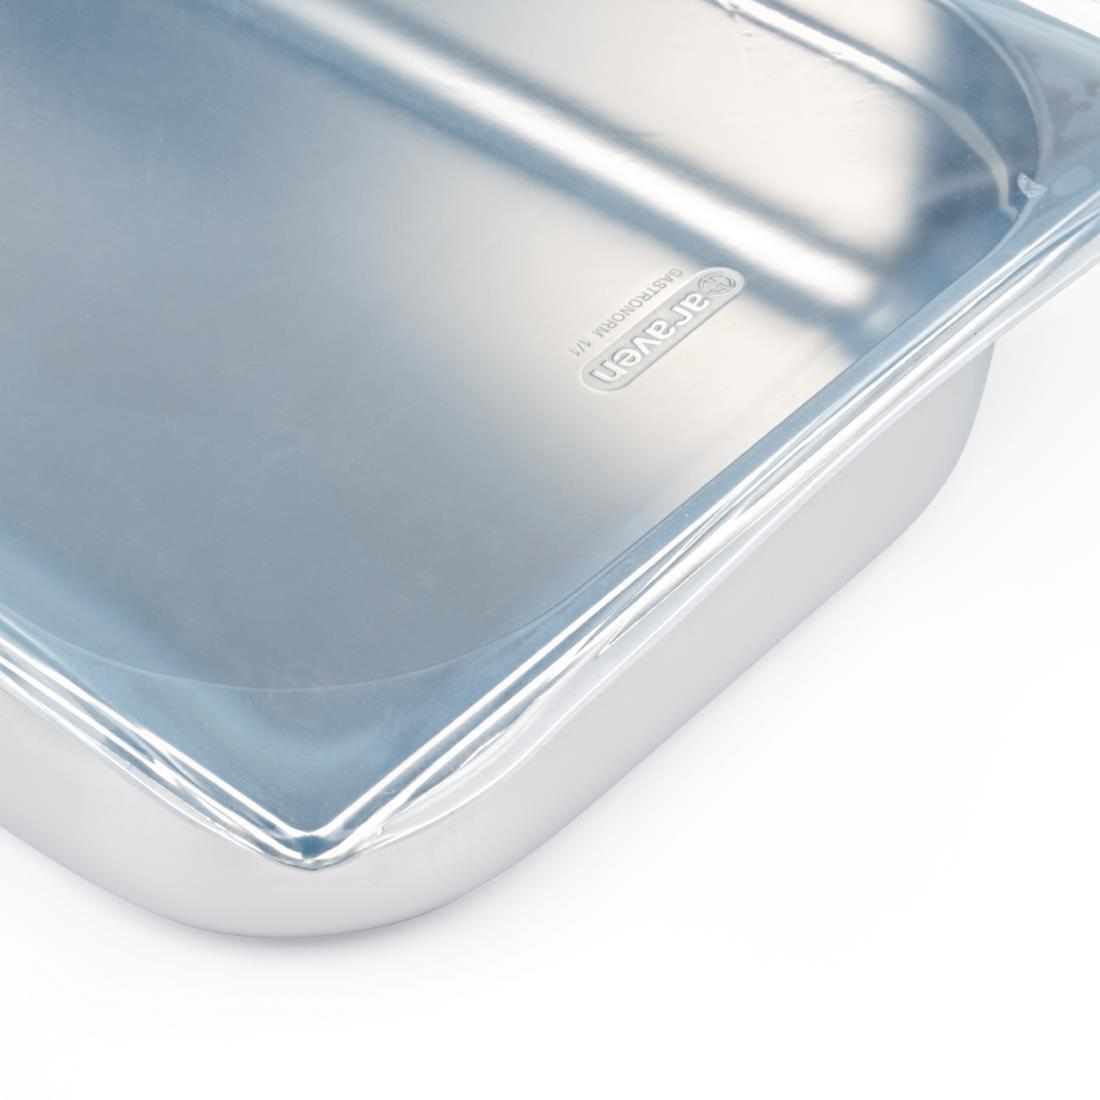 Araven Silicone 1/1 Gastronorm Lid - GG800  - 2